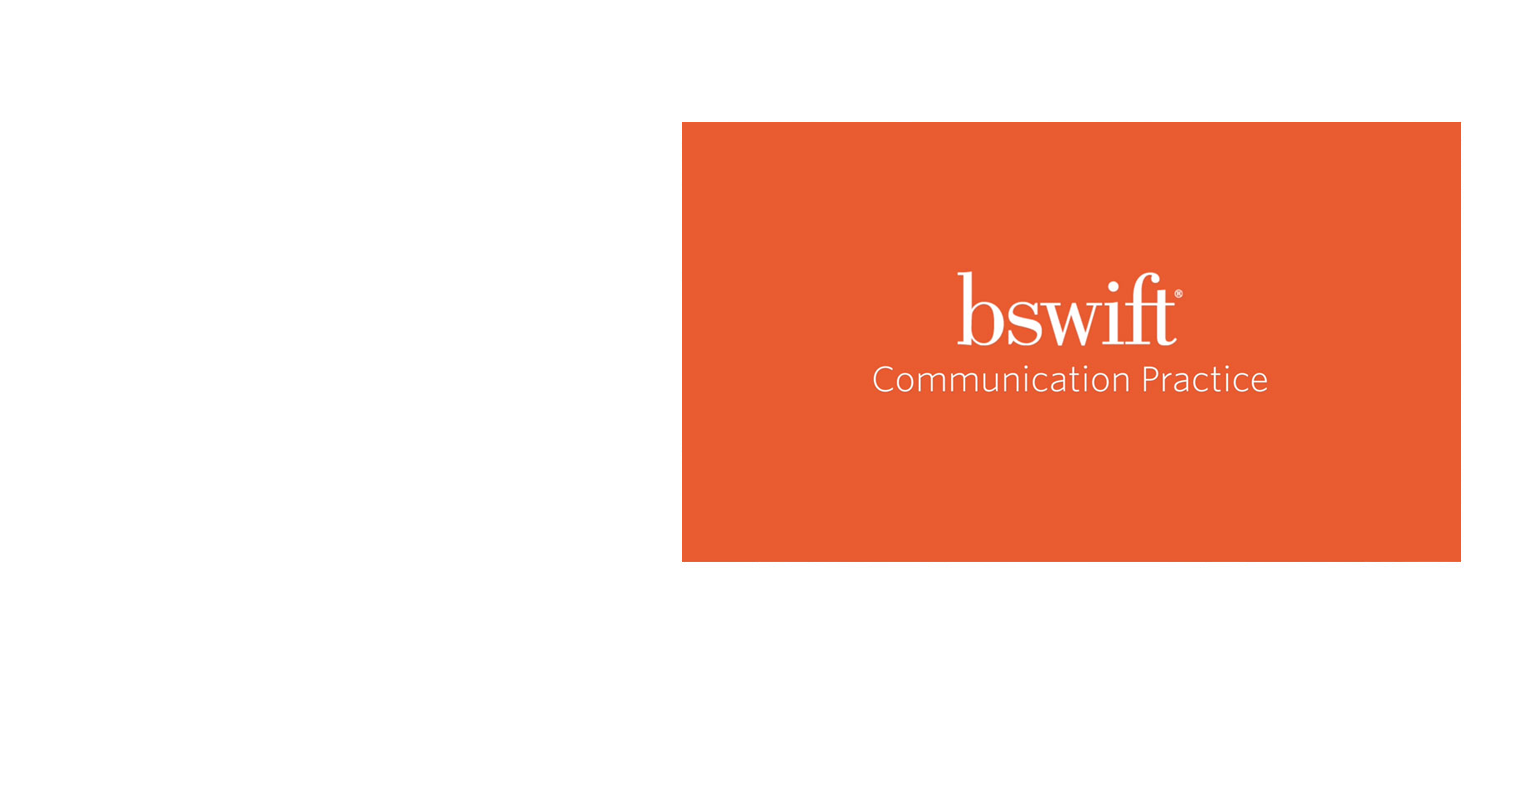 bswift Communication Practice